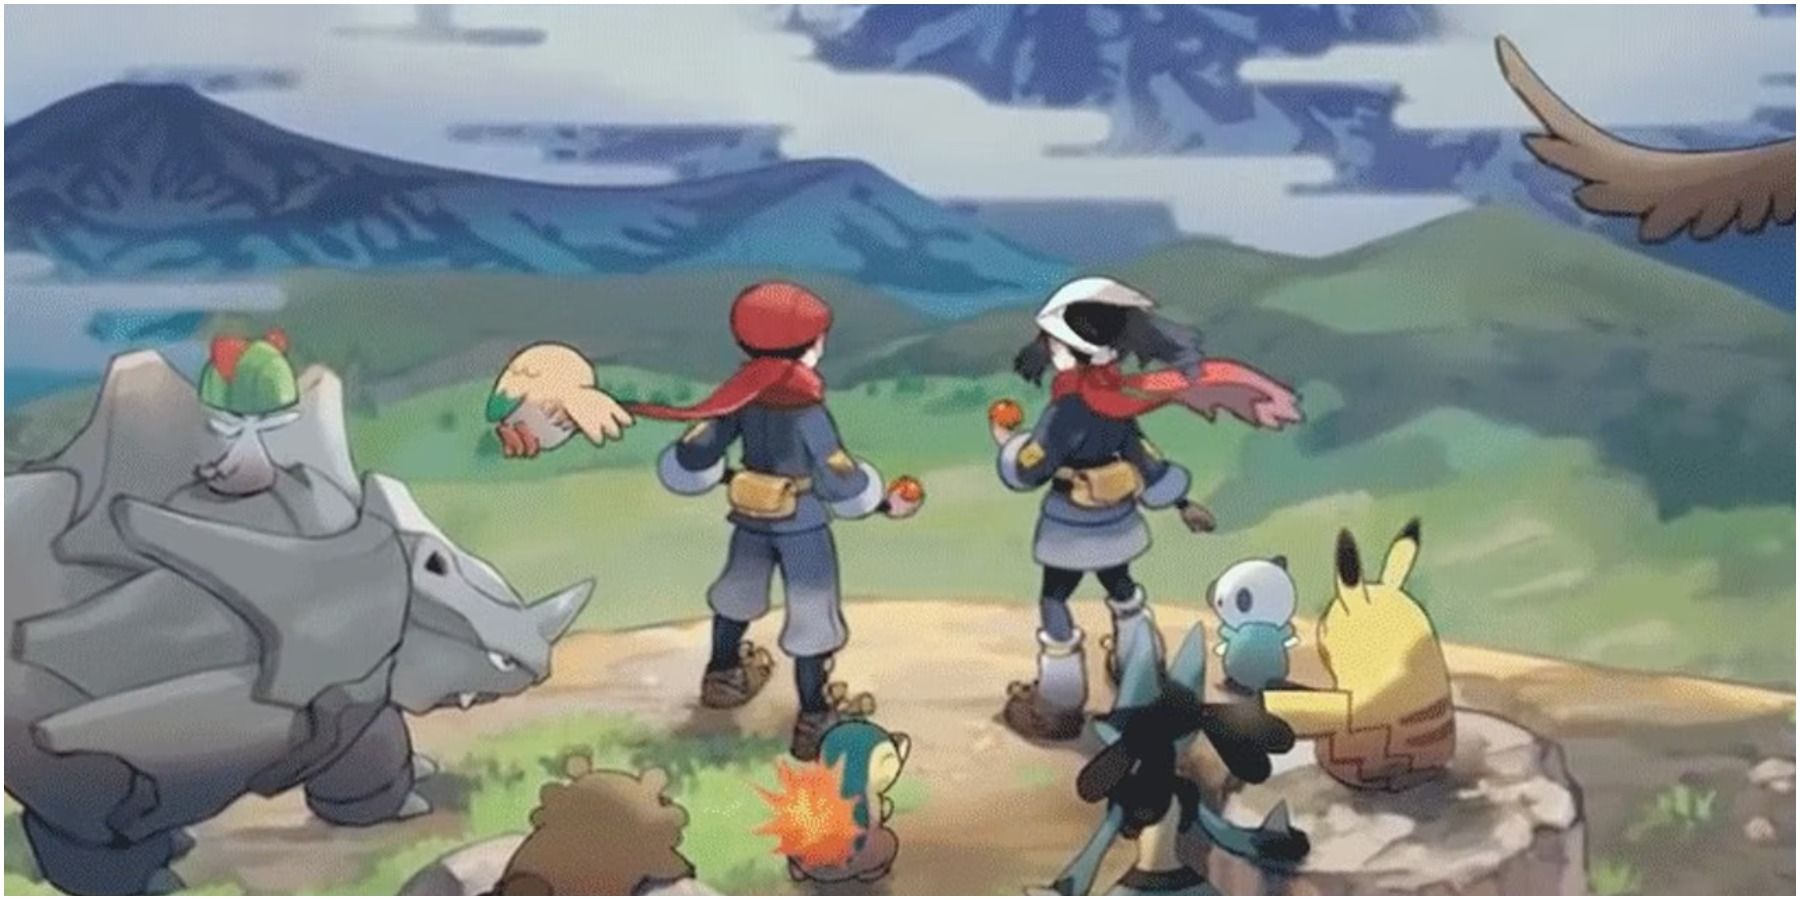 Protagonists looking at mountains with Pokemon.